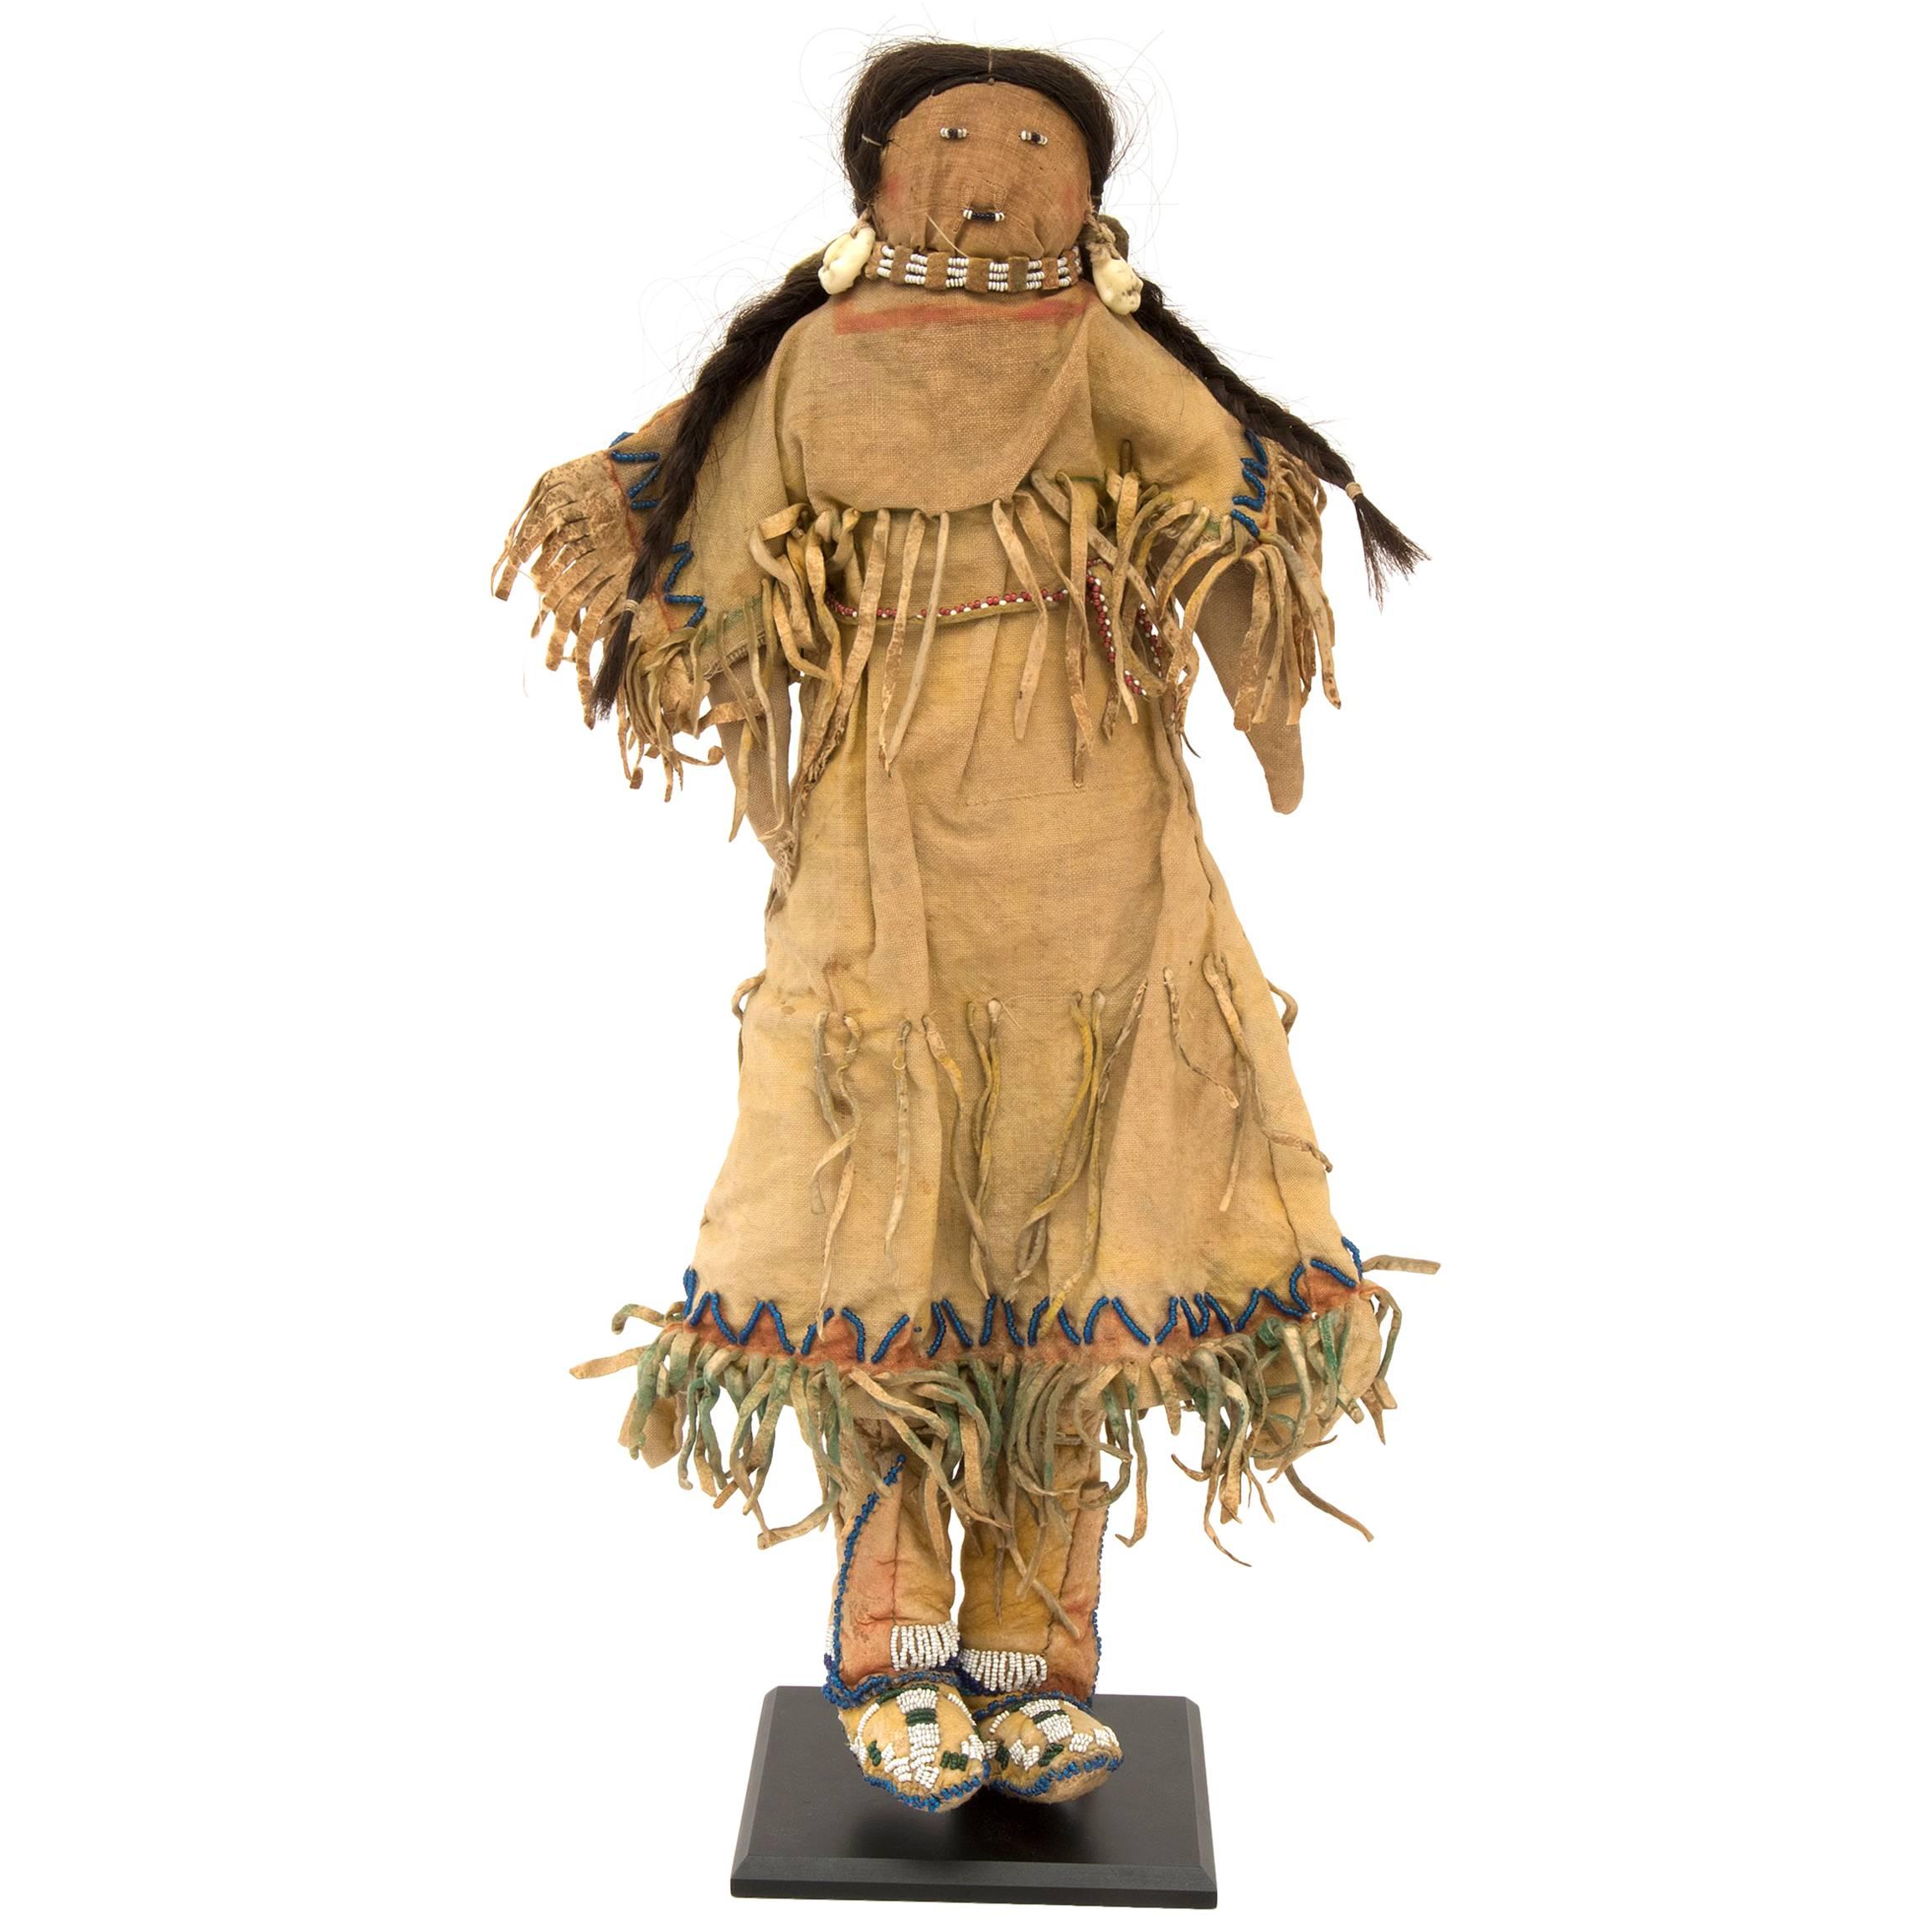 Antique Native American Doll, Southern Cheyenne (Plains), 19th Century